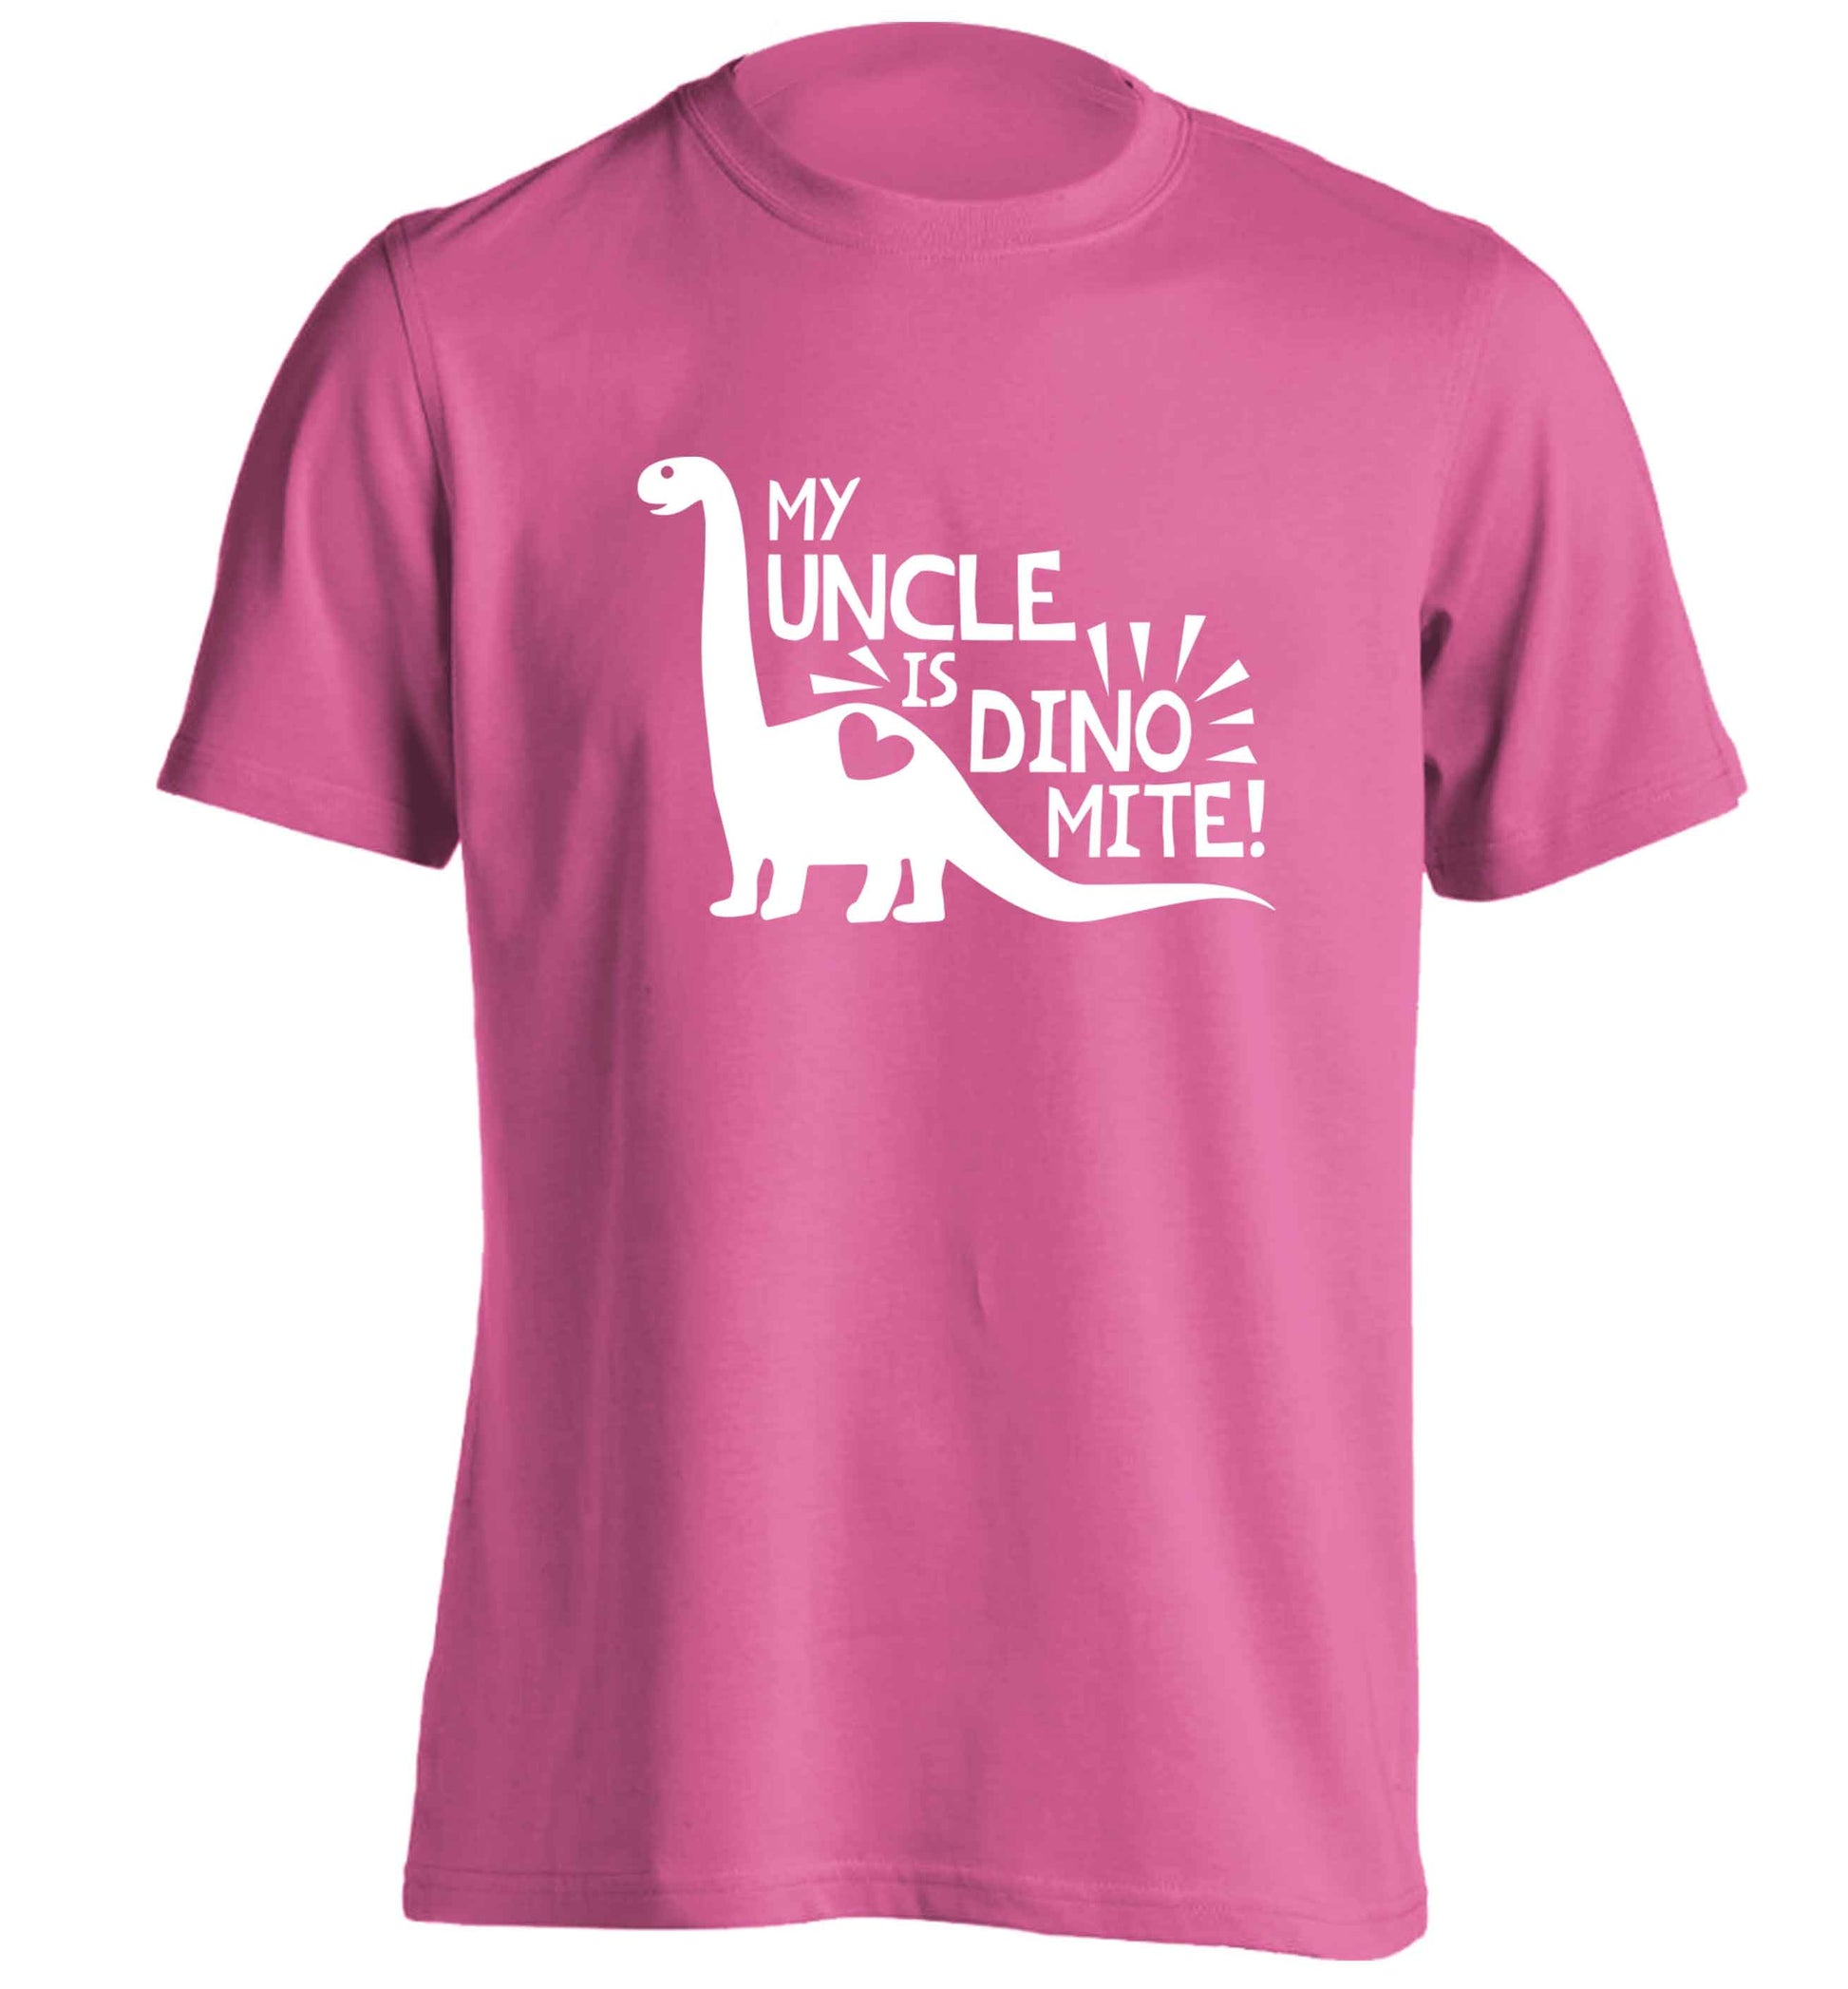 My uncle is dinomite! adults unisex pink Tshirt 2XL